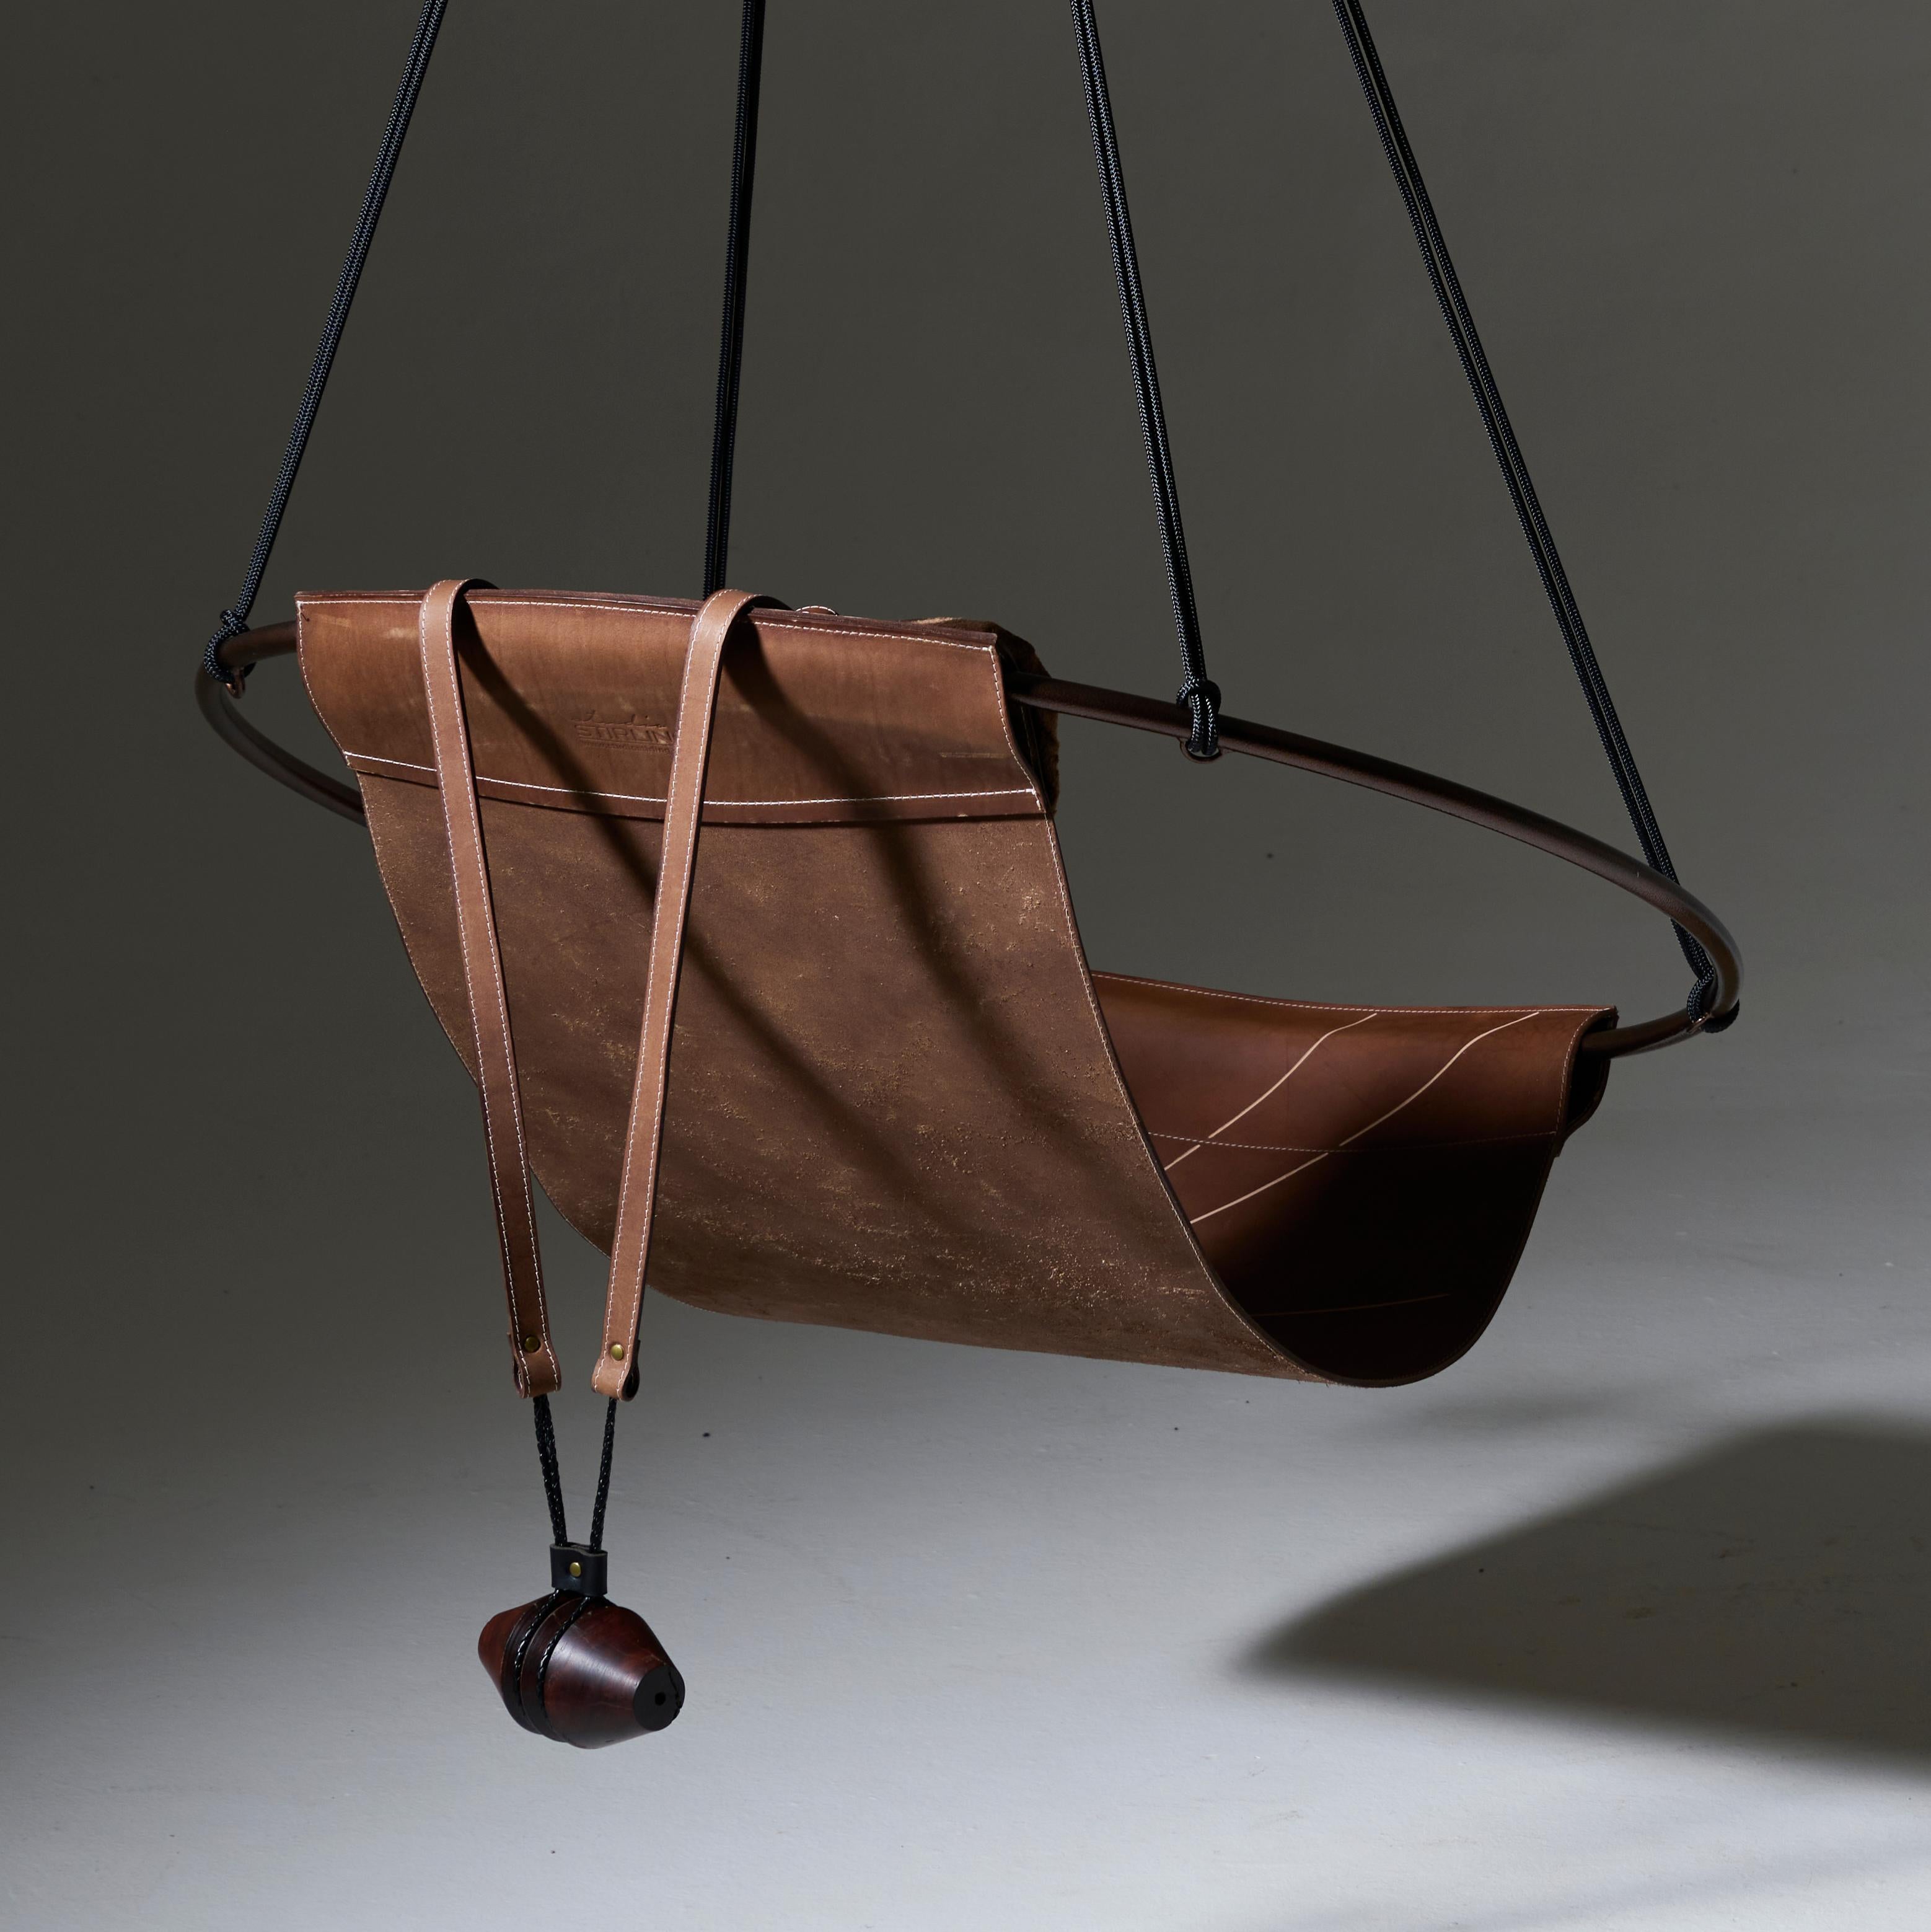 Stripped away from all excess, this hanging chair has a circular frame with the sheet of leather hanging loose within it, to create a sleek, sexy, and oh so comfortable experience. This chair’s clean lines and lightness makes it a perfect fit for